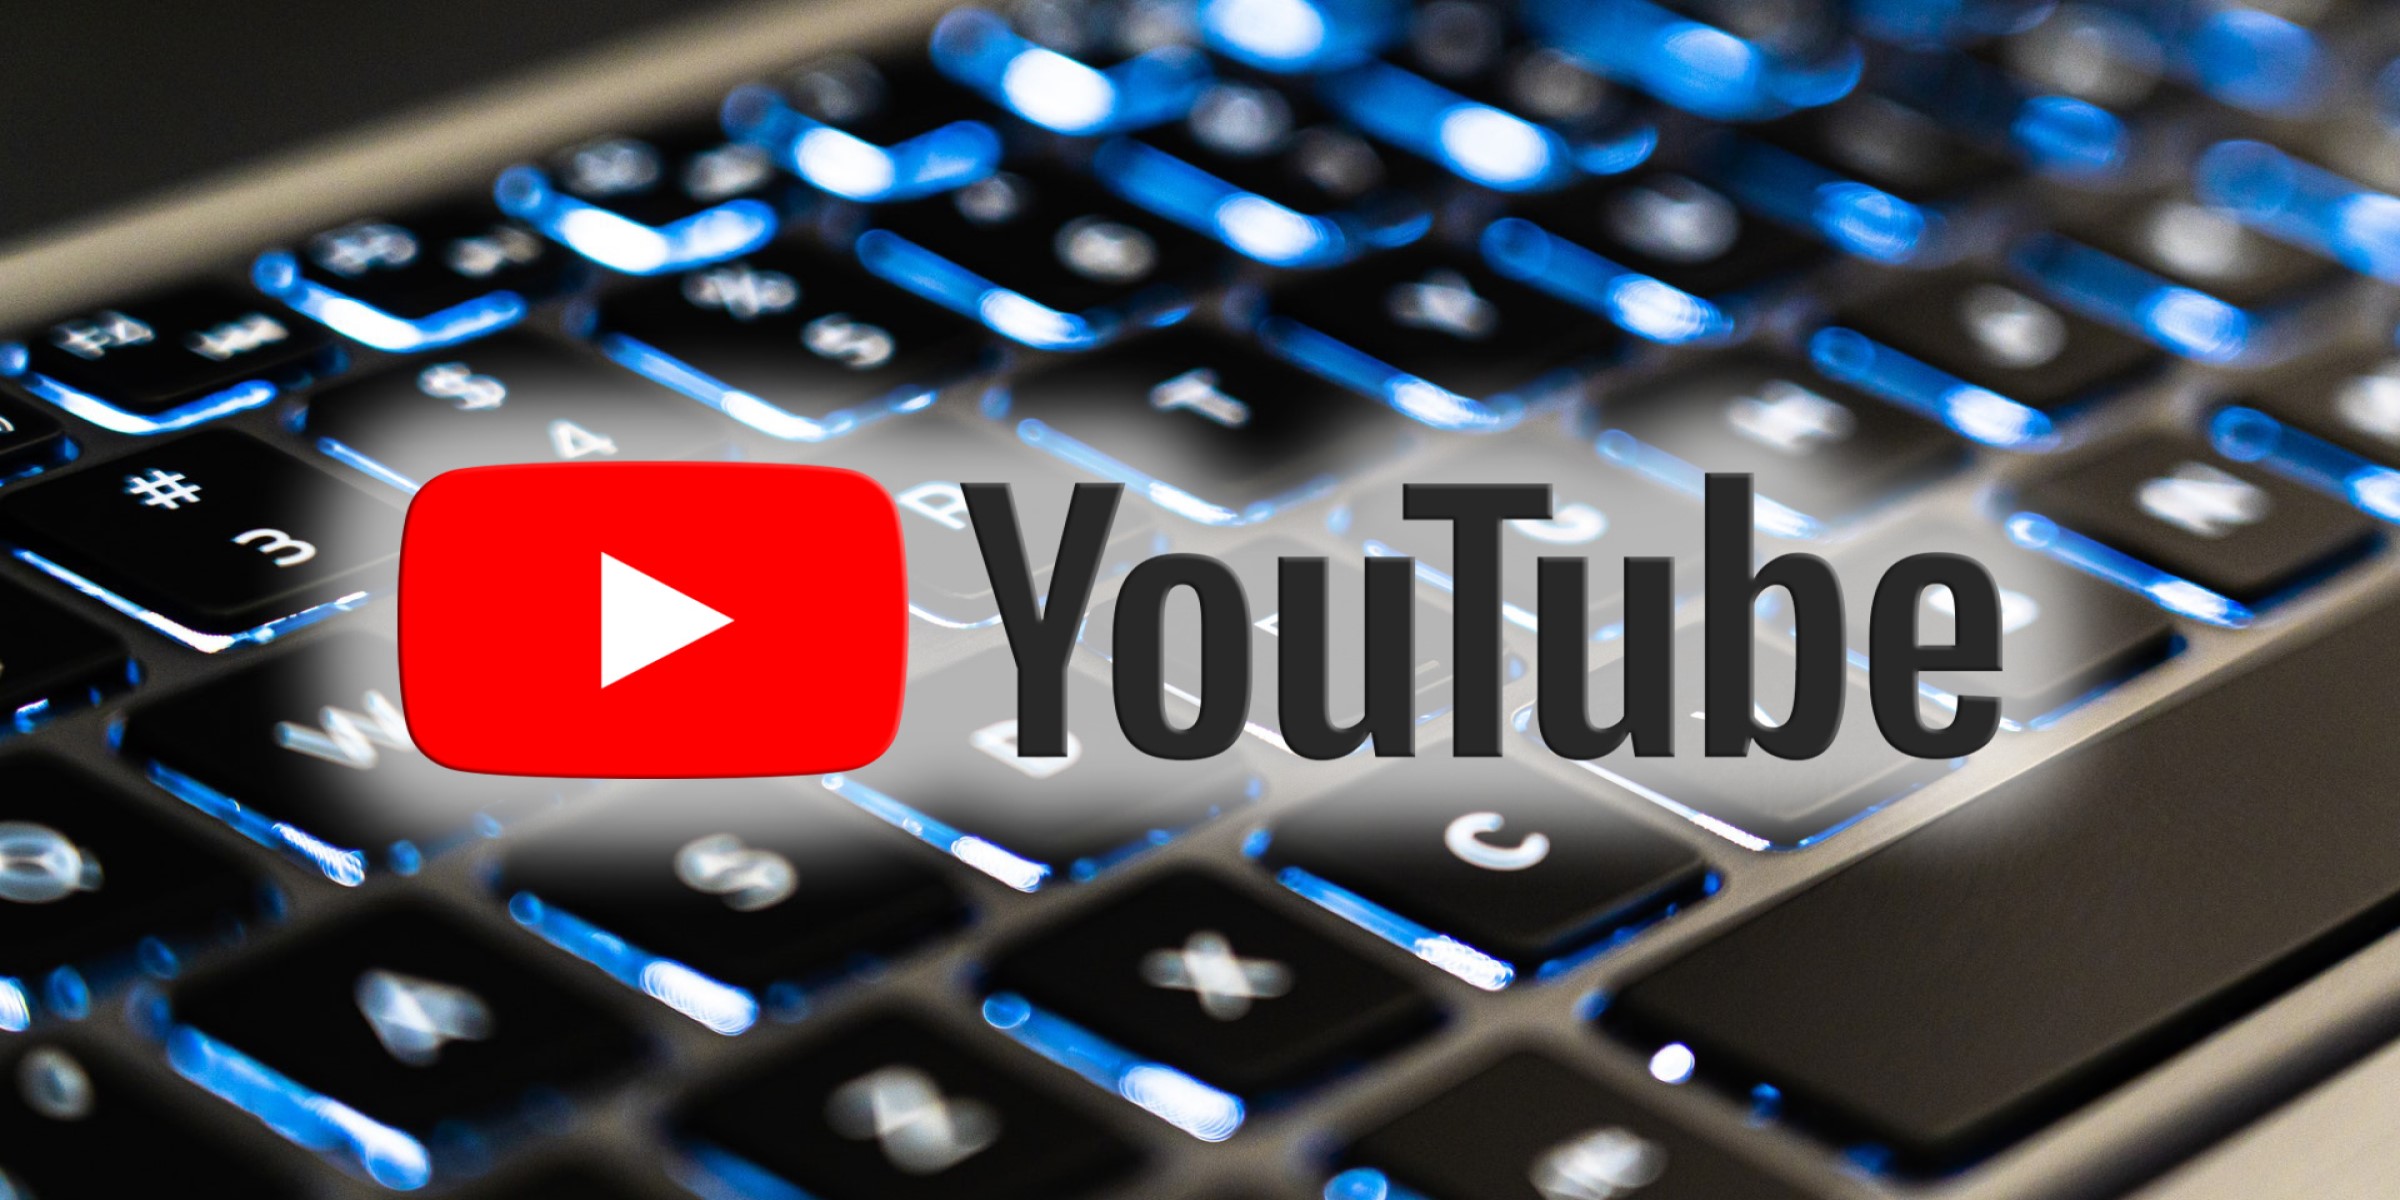 SEO on YouTube: 5 rich tips to boost it